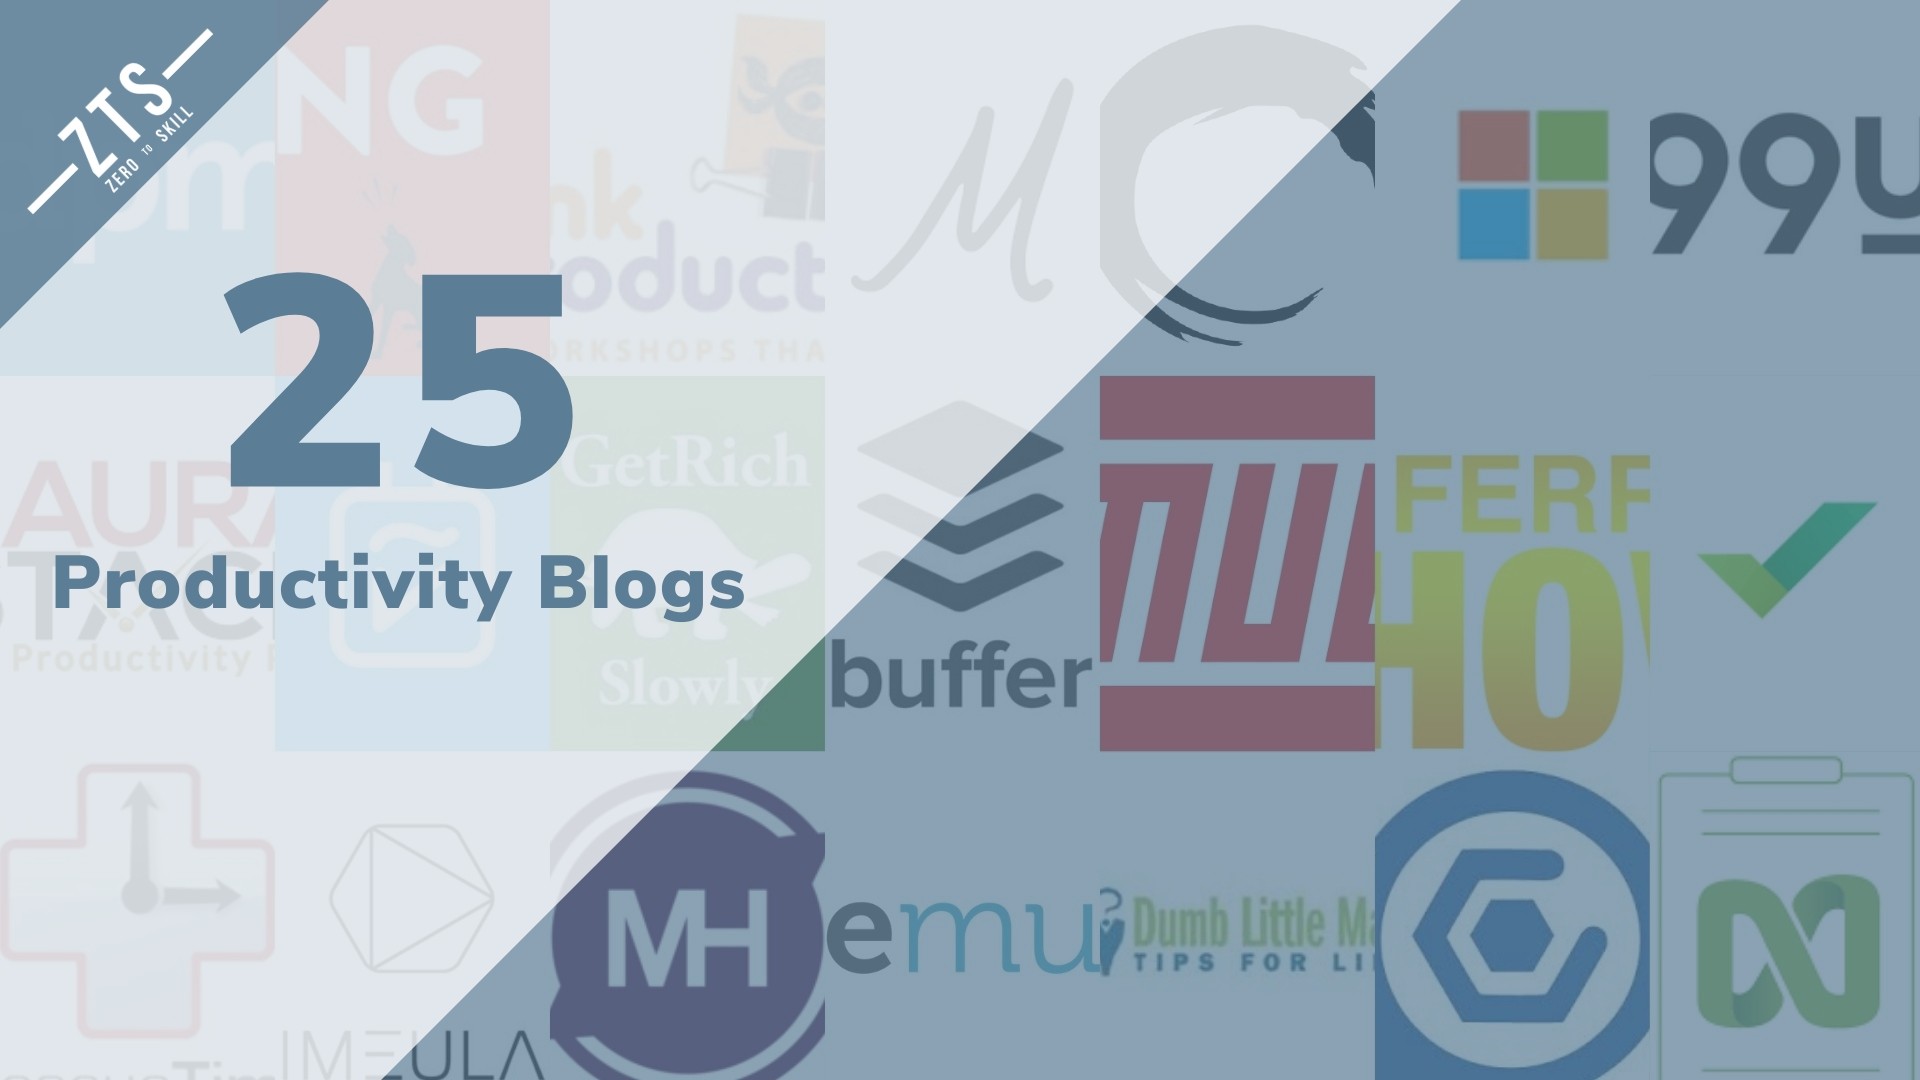 Top 25 Productivity Blogs for 2020